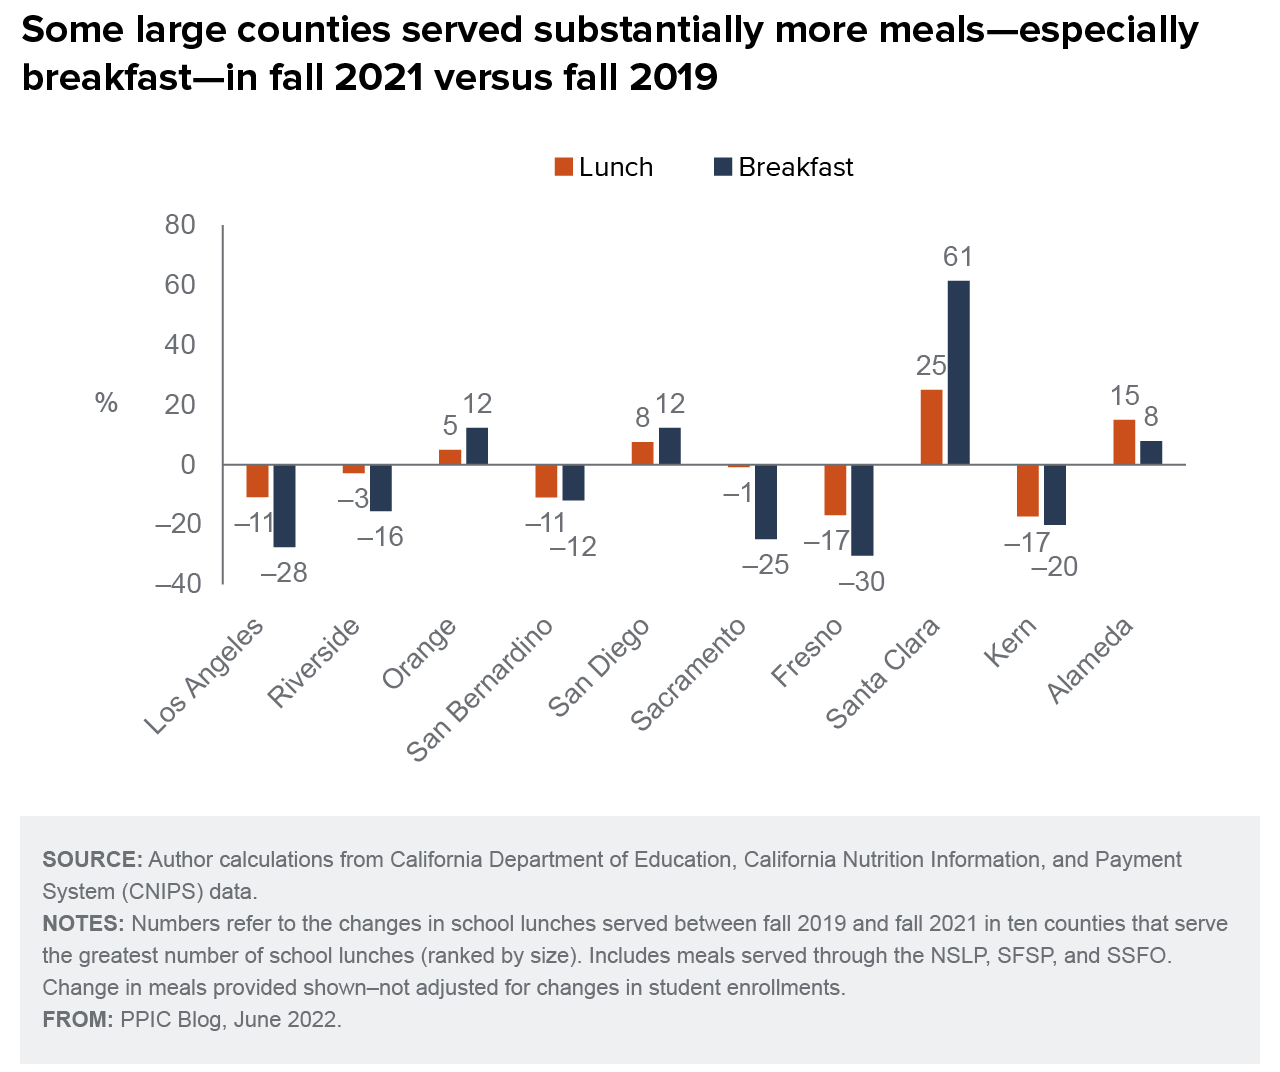 figure - Some large counties served substantially more meals—especially breakfast—in fall 2021 versus fall 2019